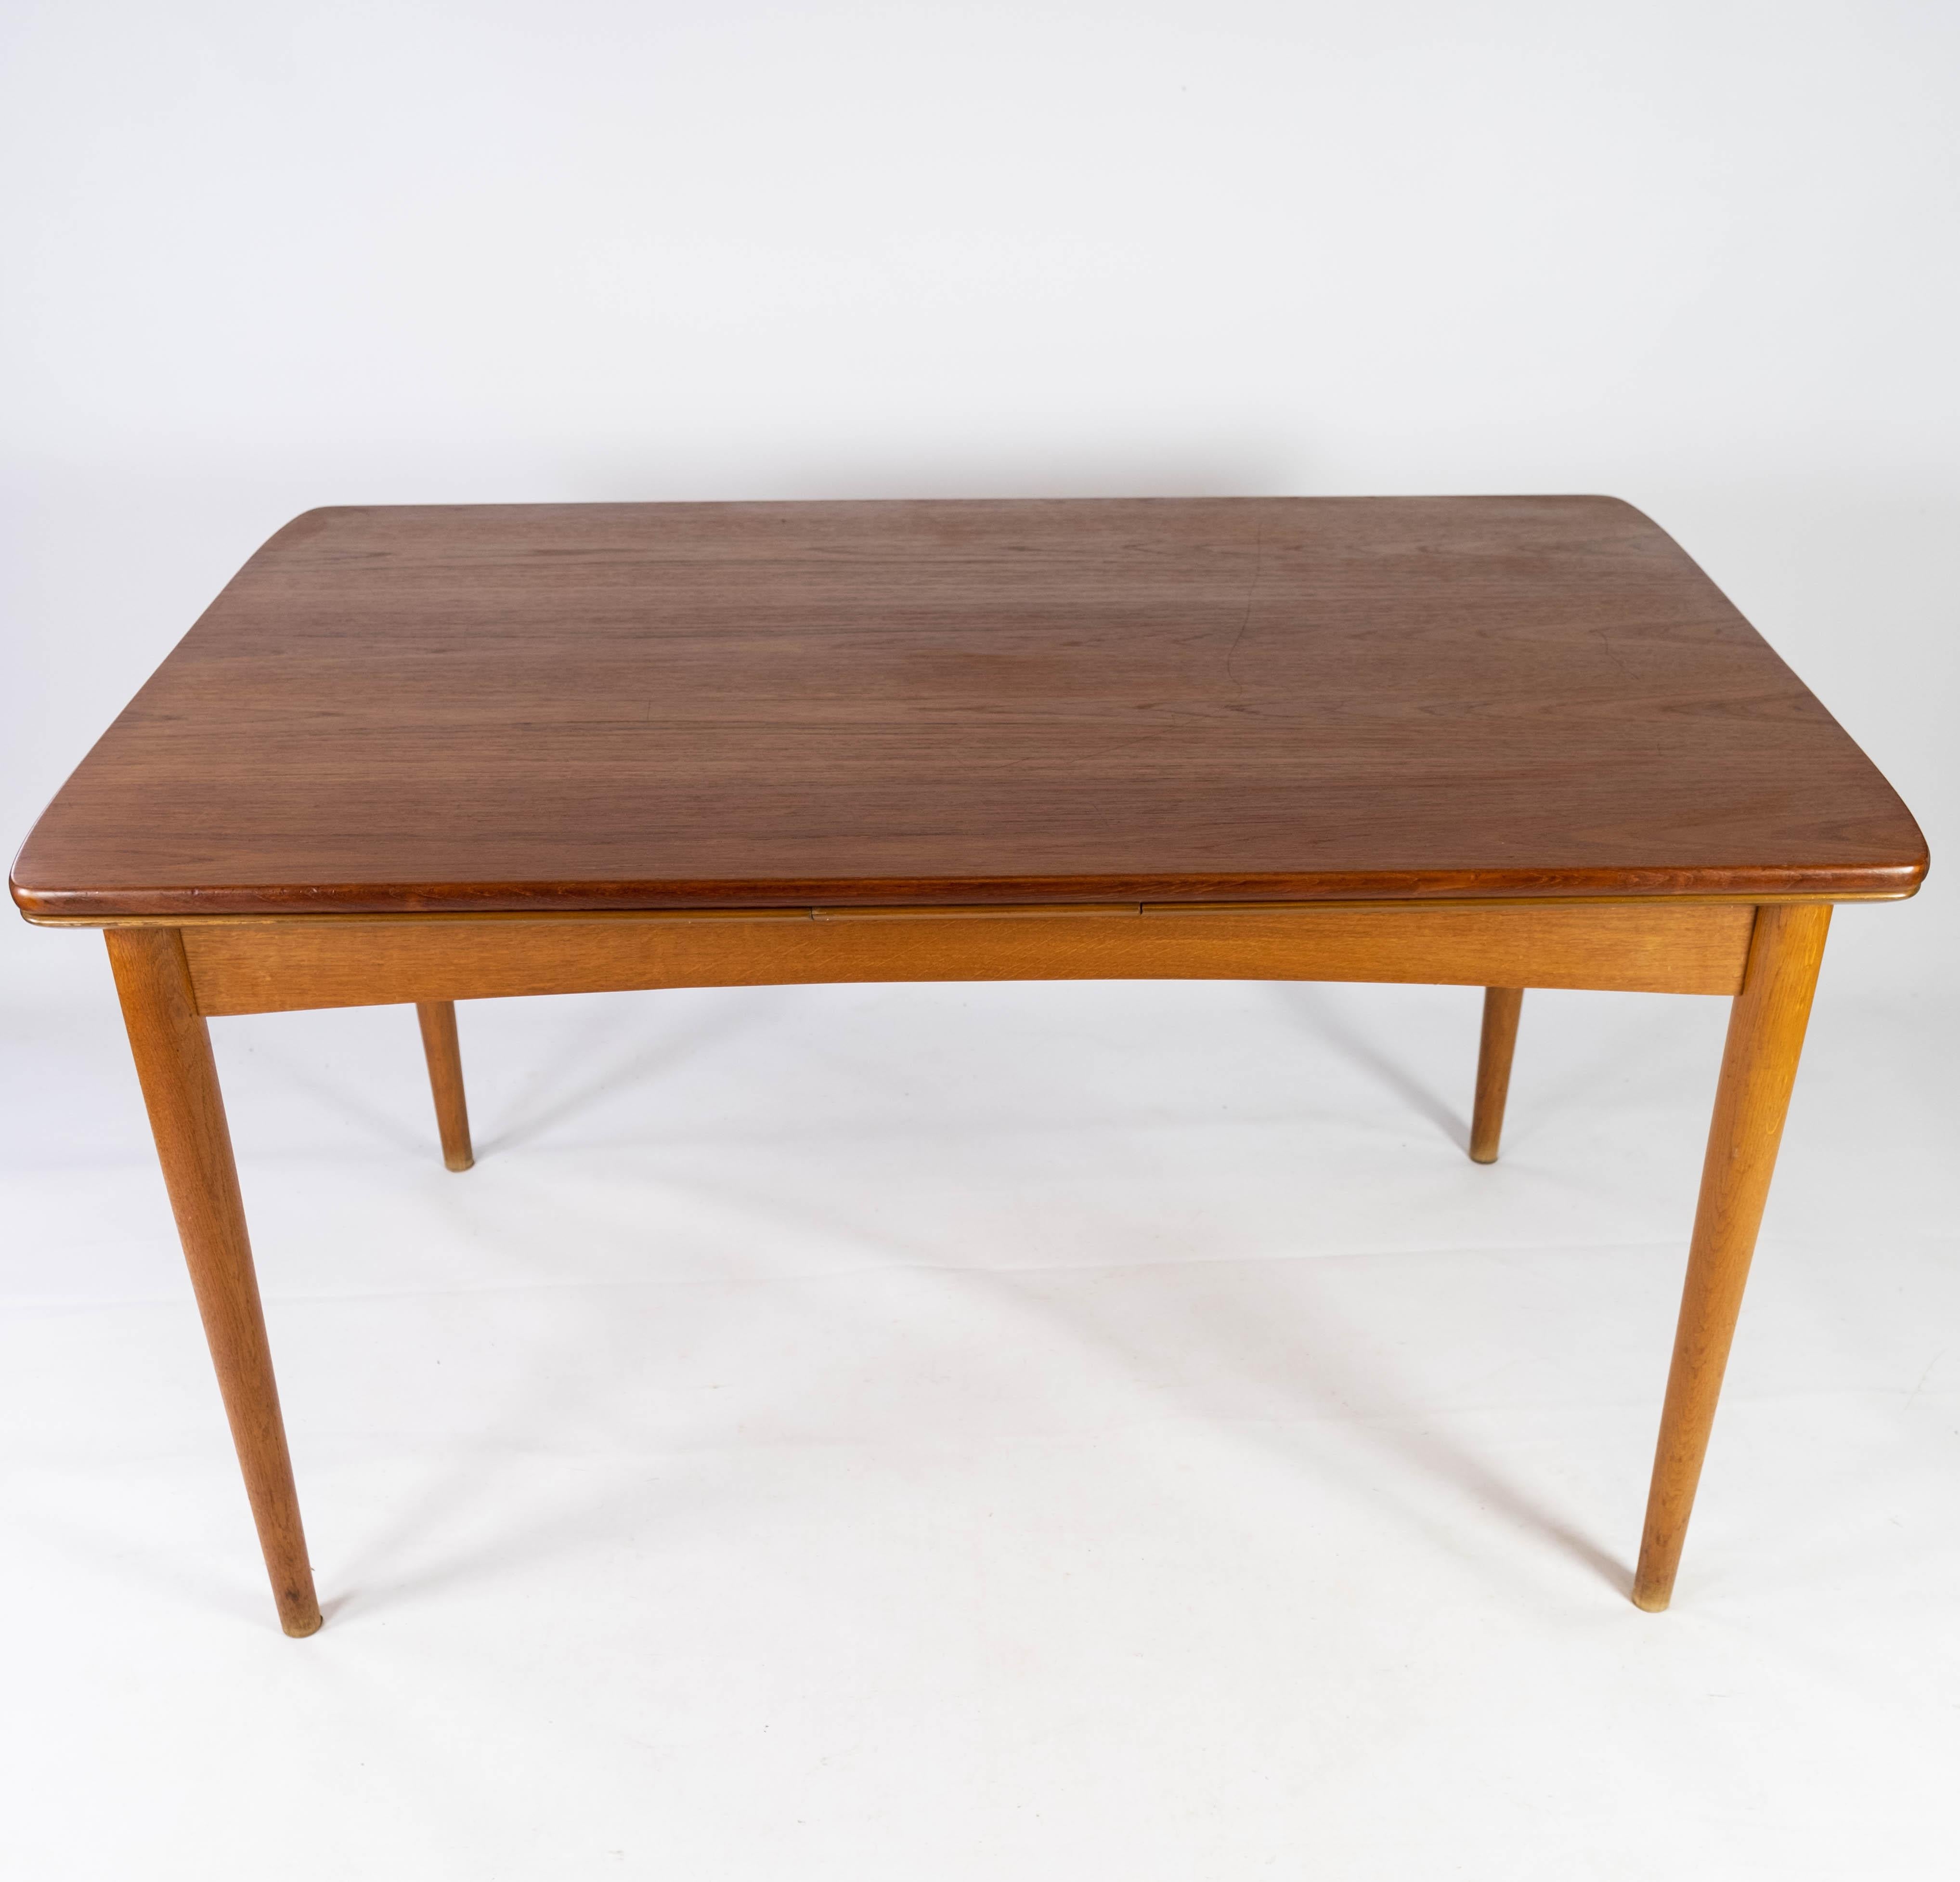 Dining table in teak with extensions and legs in oak, of Danish design from the 1960s. The table is in great vintage condition.
Extensions are each 53.5 cm.